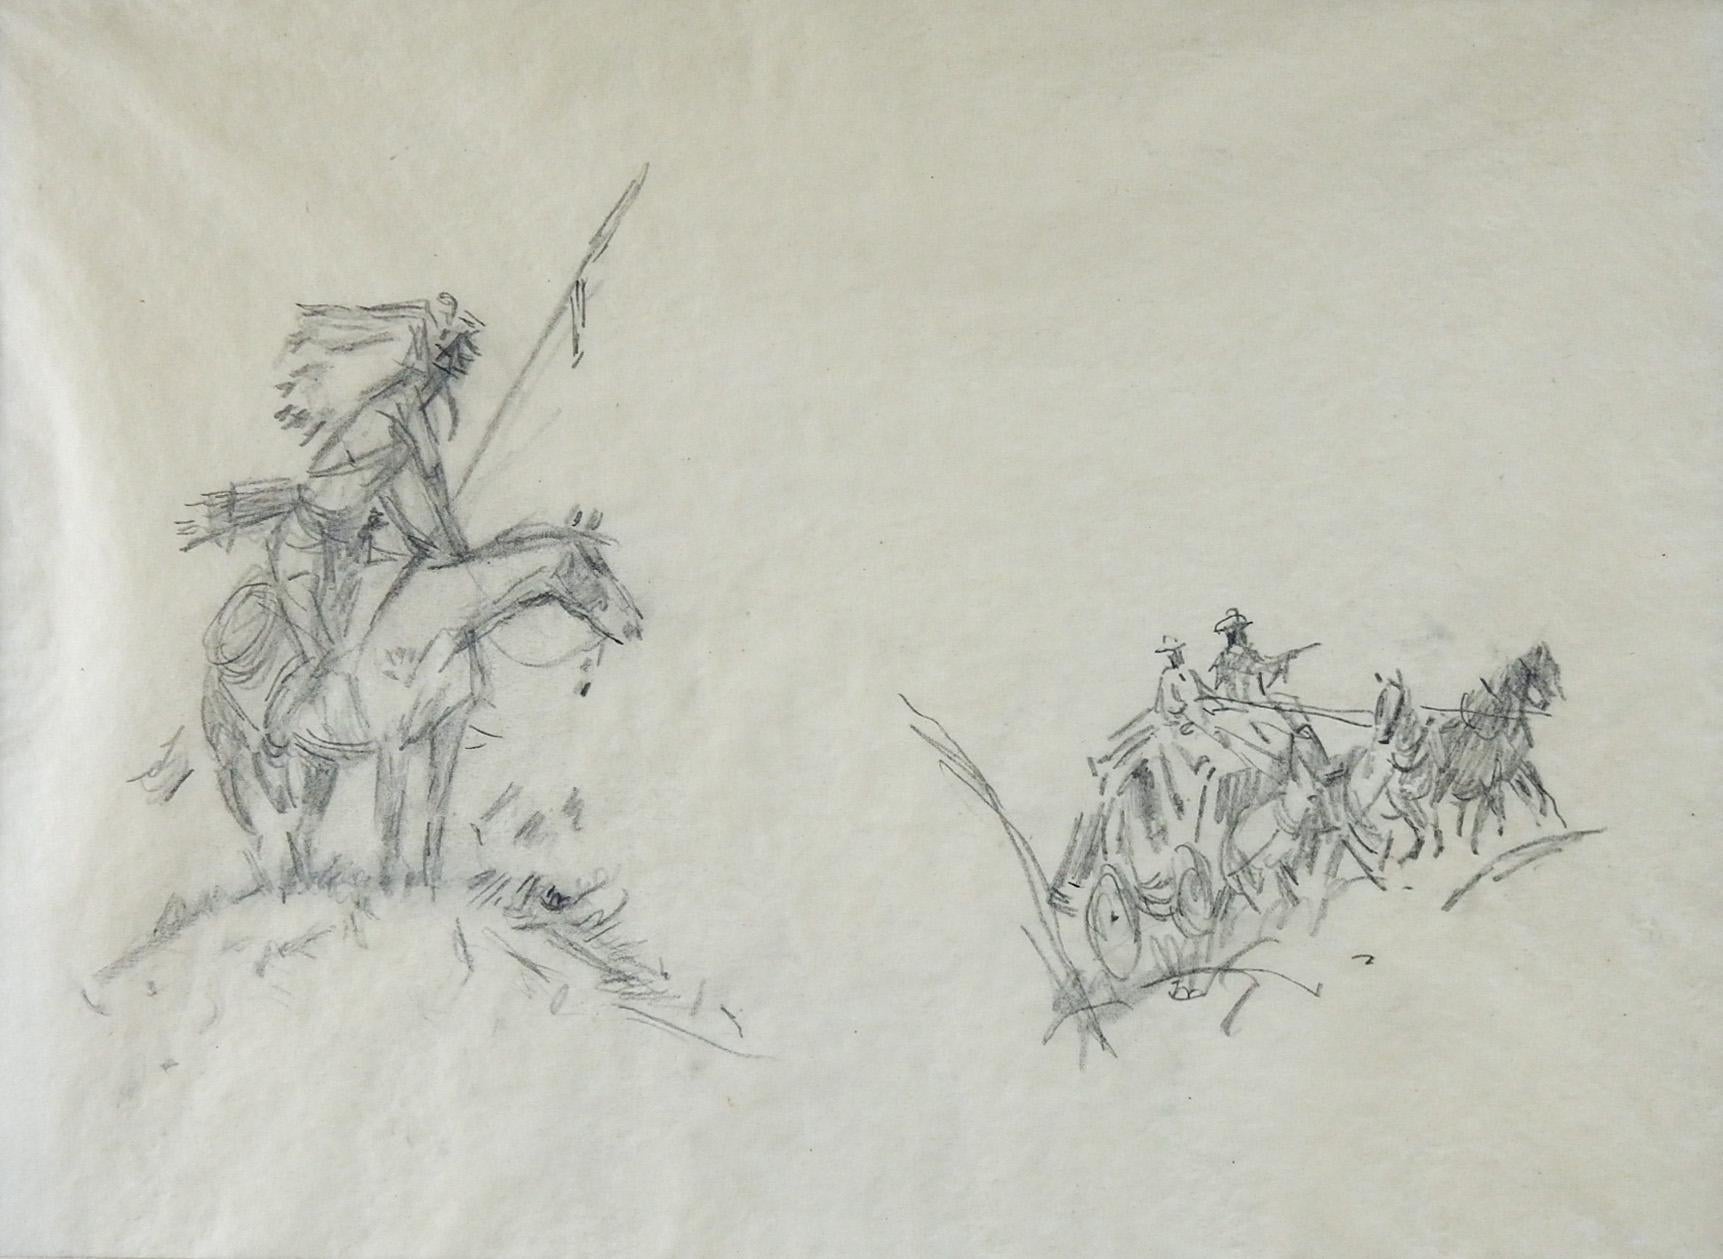 Vintage mid-century pencil on onionskin paper illustration drawing. Unsigned but attributed to Frank Hoffmann (1888-1958) western illustrator. Scene is a quick study likely for a western story magazine and shows Indian on horseback watching a